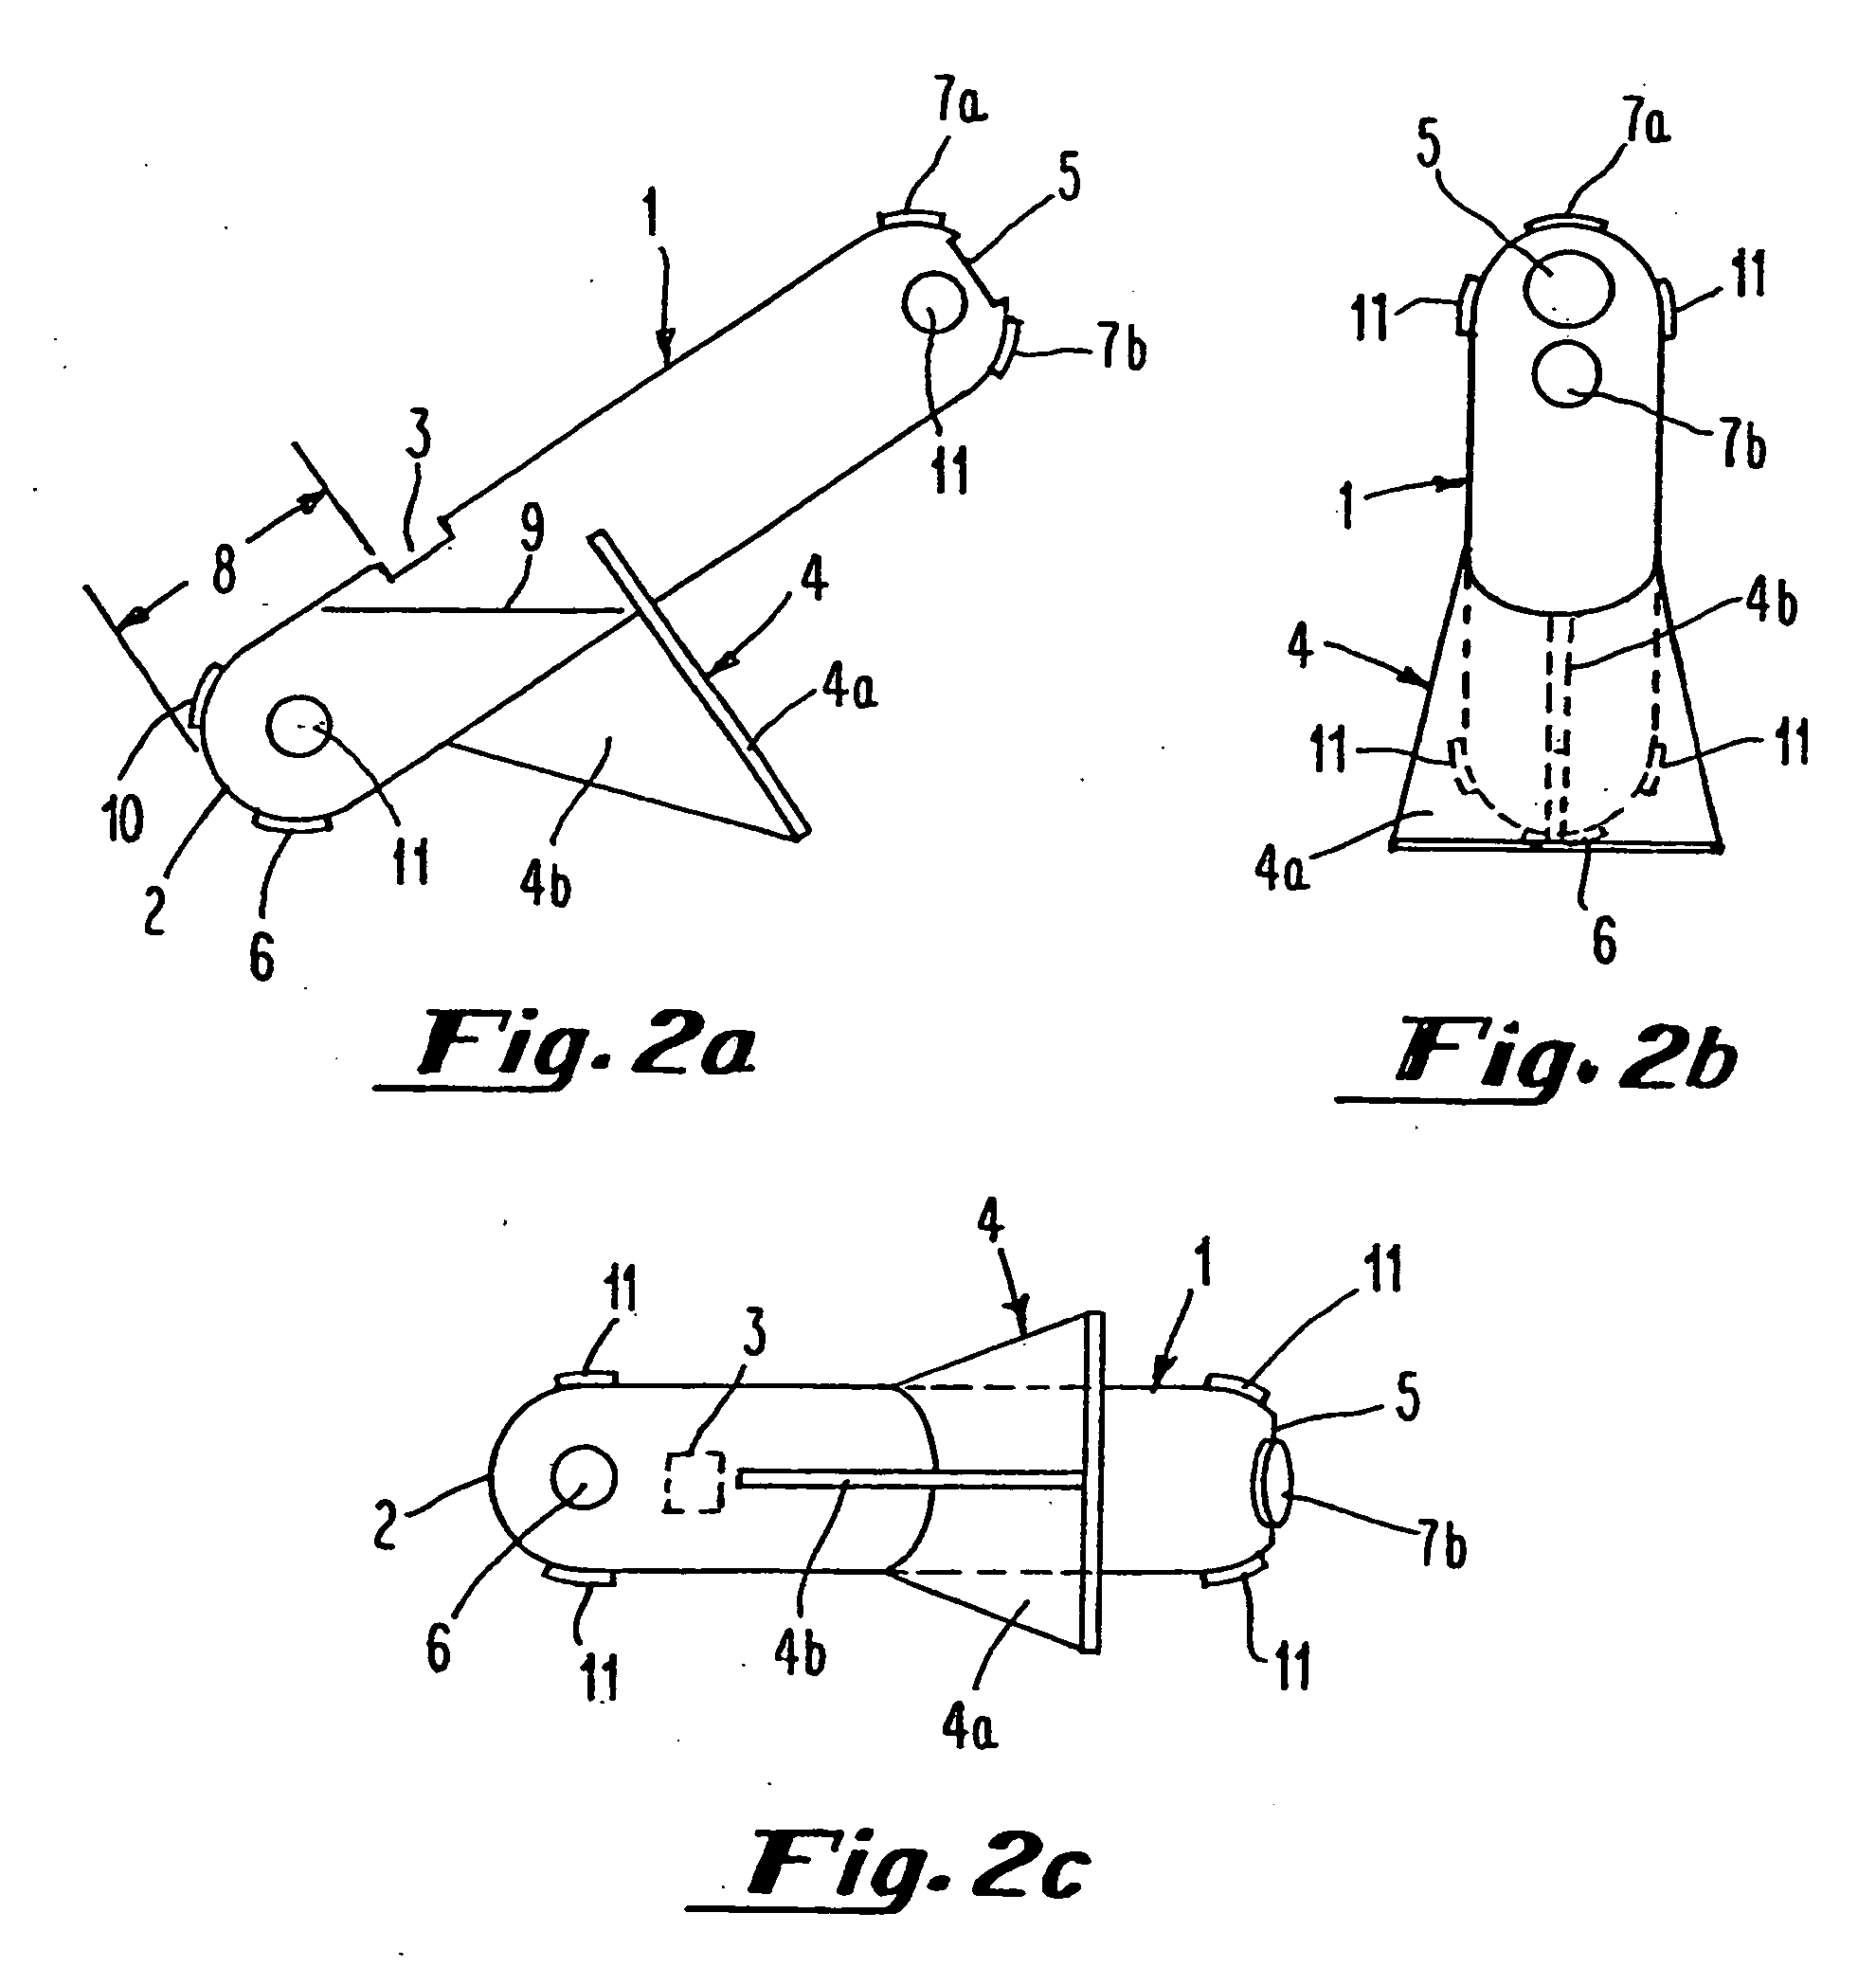 Methods and formulations for the efficient delivery of drugs by nebulizer